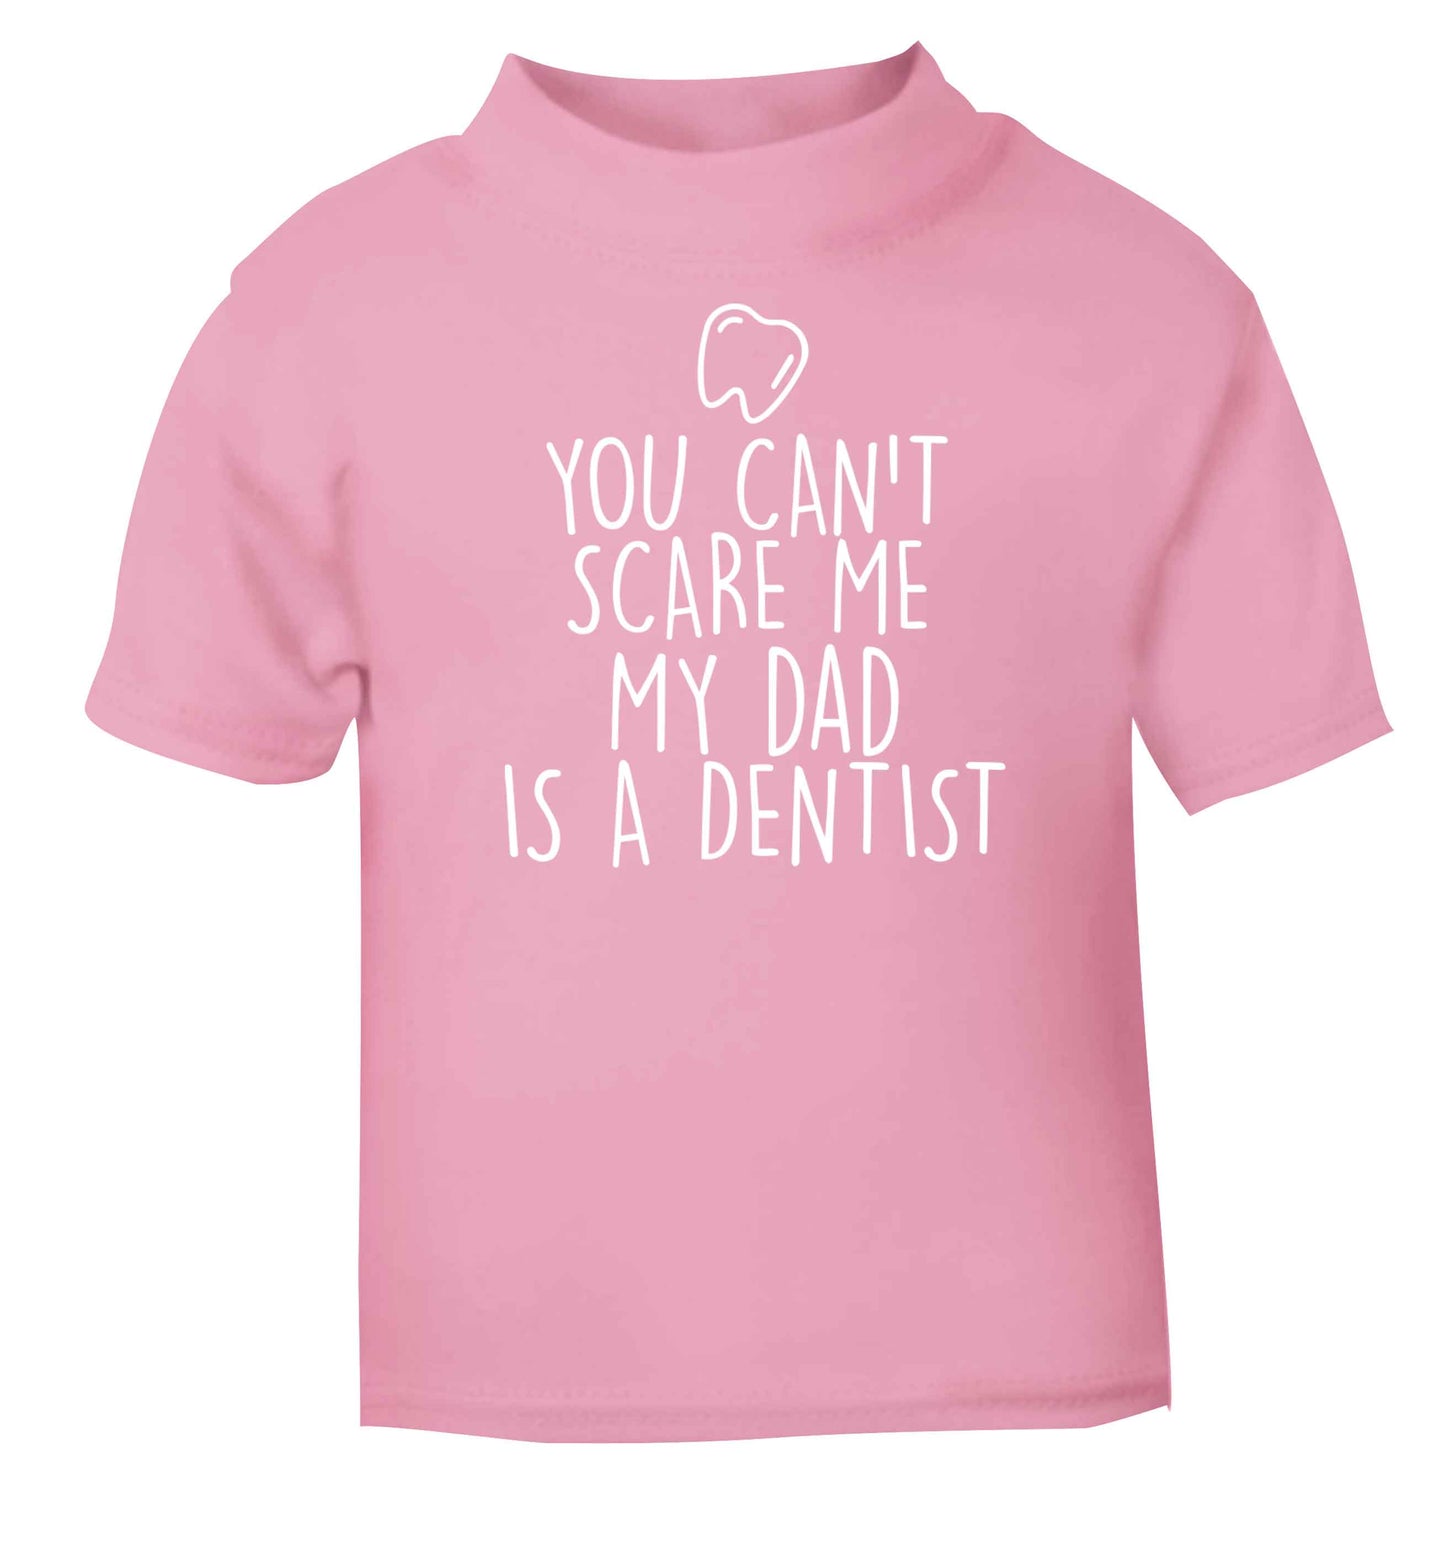 You can't scare me my dad is a dentist light pink baby toddler Tshirt 2 Years